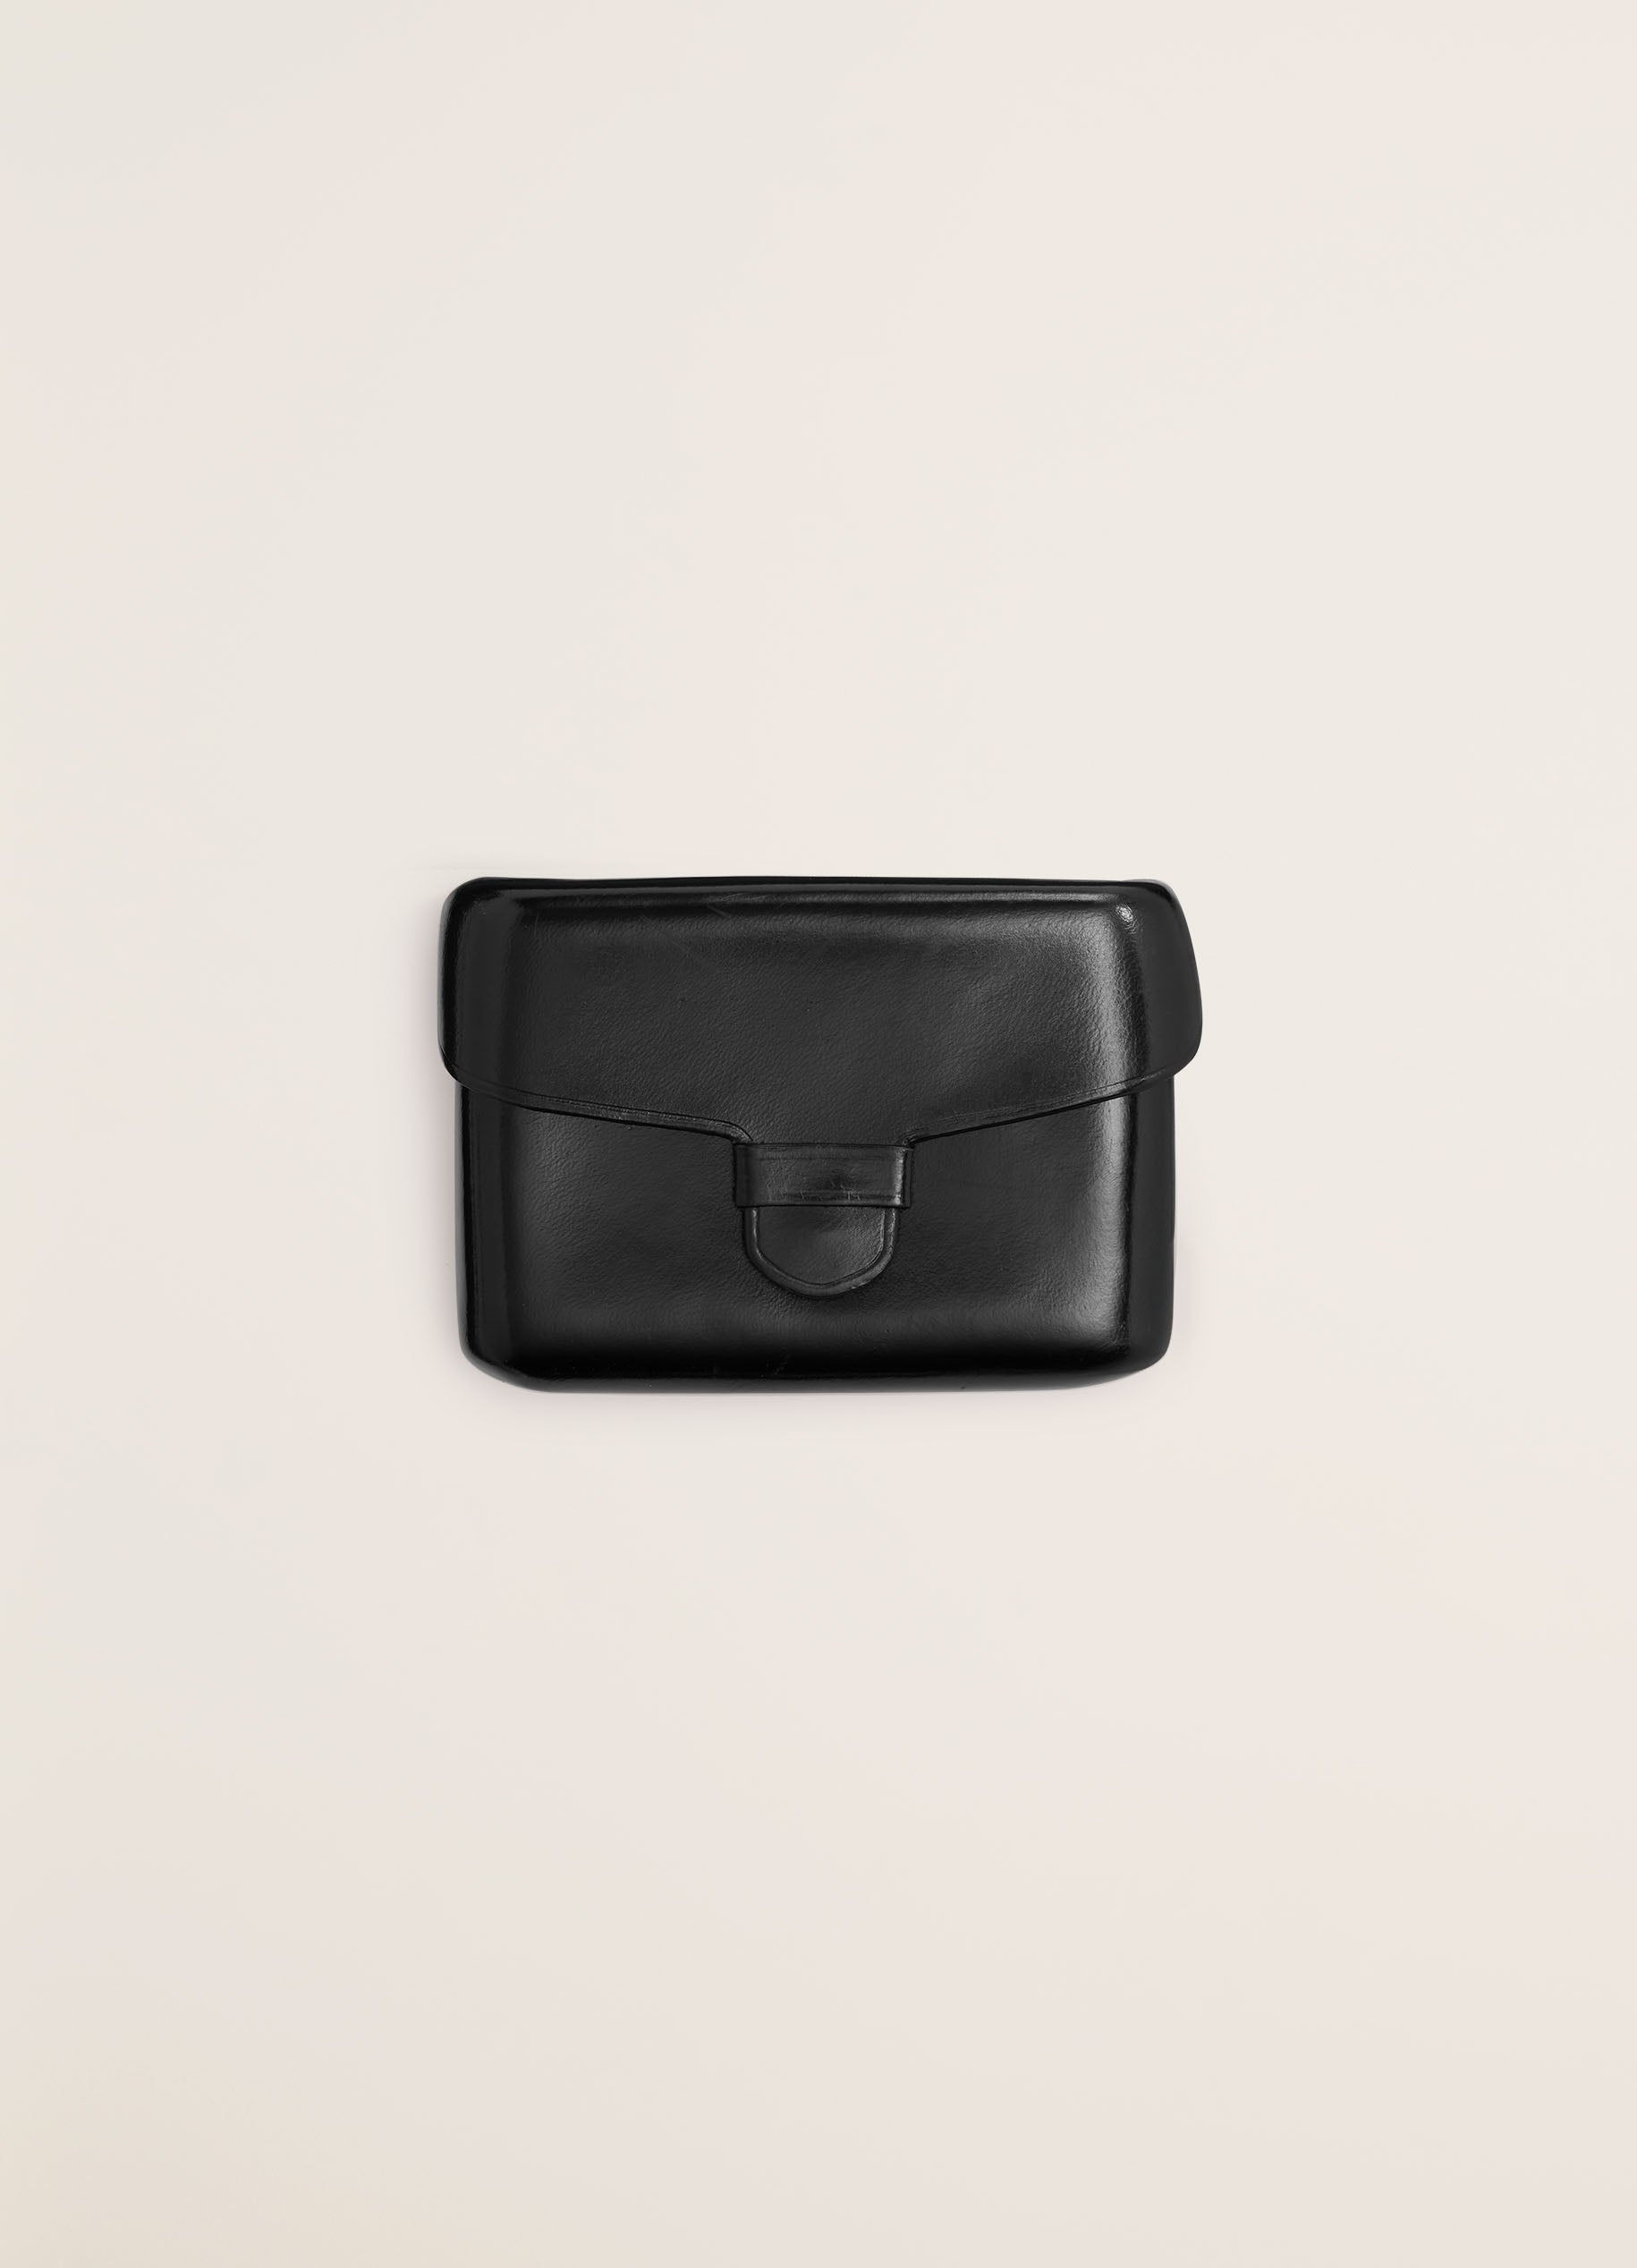 IL BUSSETTO FOR LEMAIRE CARD HOLDER - 1